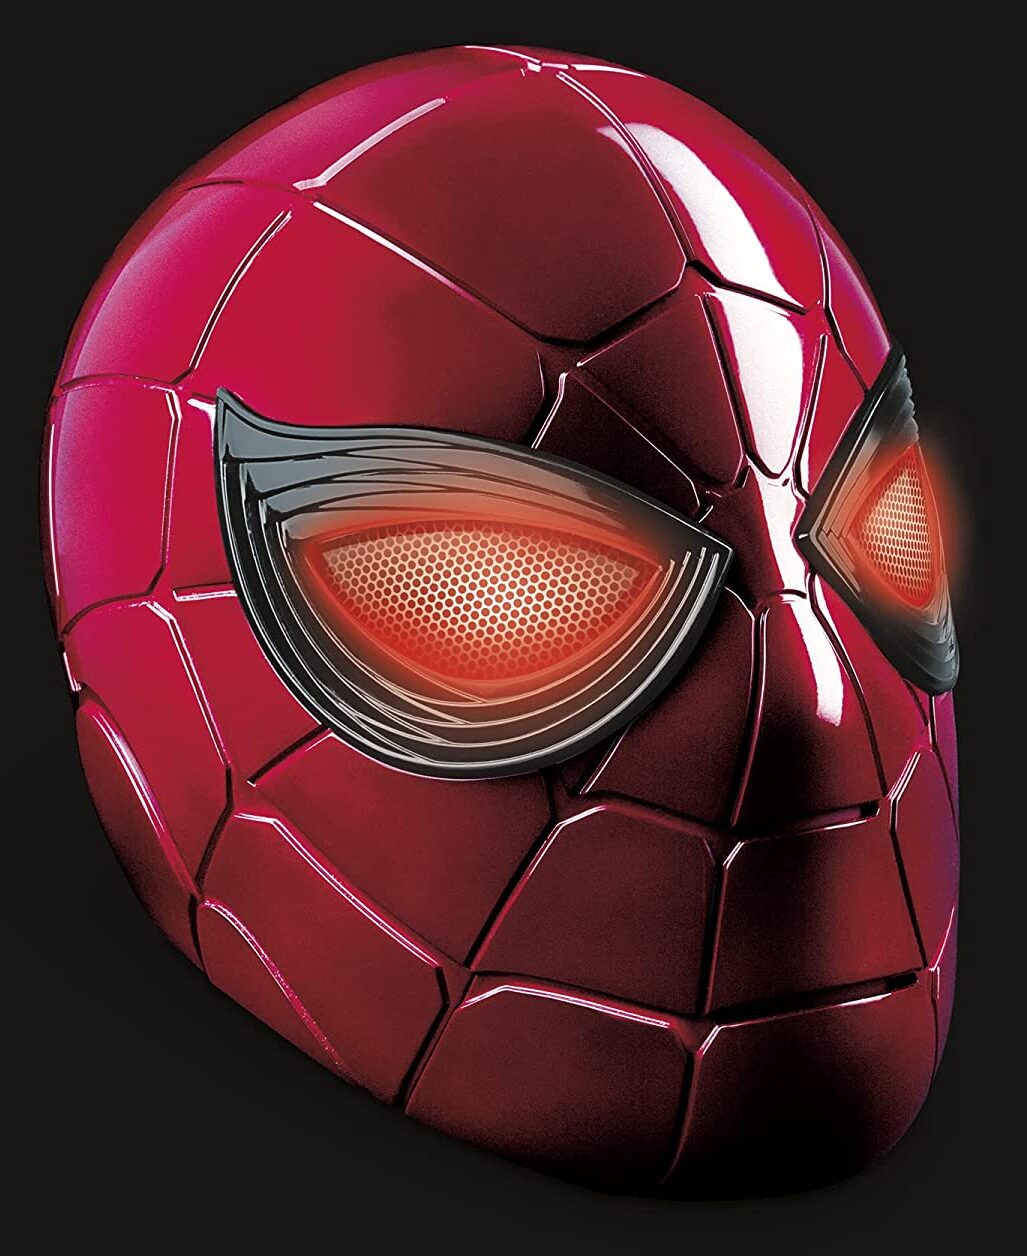 Marvel Legends Iron Spider Helmet Wearable Life-Size Replica Up for Order!  - Marvel Toy News